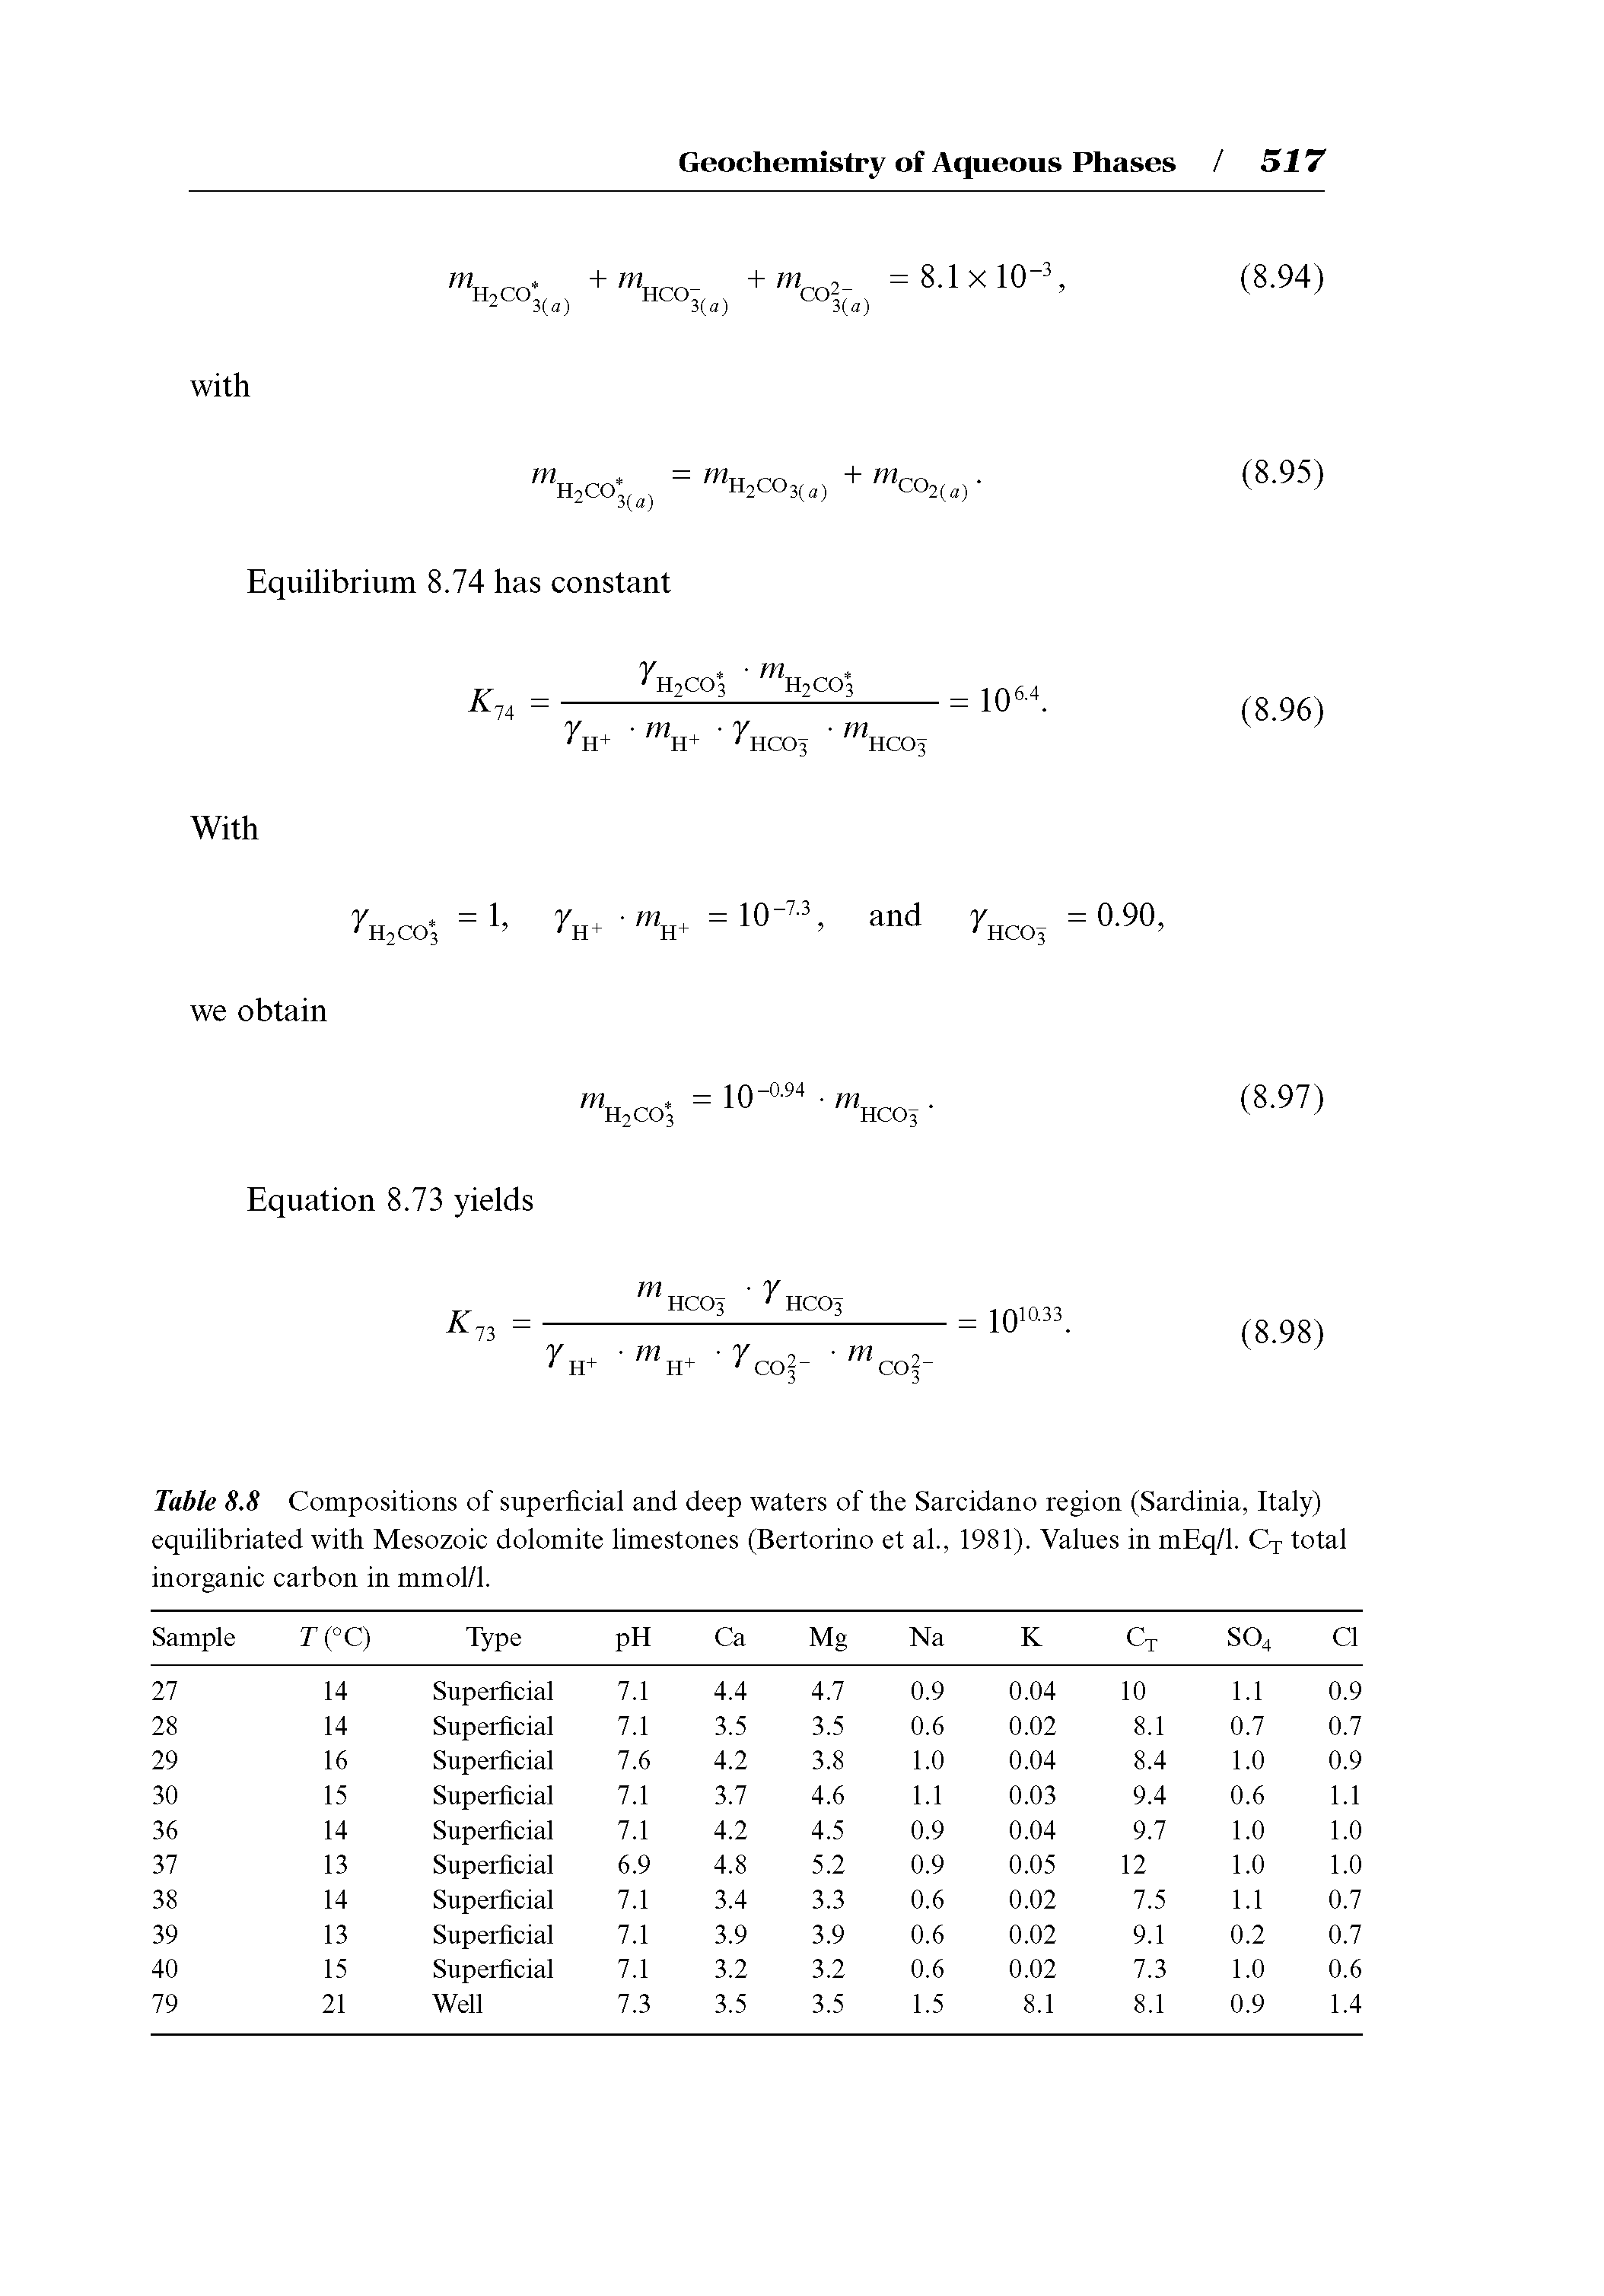 Table 8.8 Compositions of superficial and deep waters of the Sarcidano region (Sardinia, Italy) equilibriated with Mesozoic dolomite limestones (Bertorino et ah, 1981). Values in mEq/1. C-j- total inorganic carbon in mmol/1.